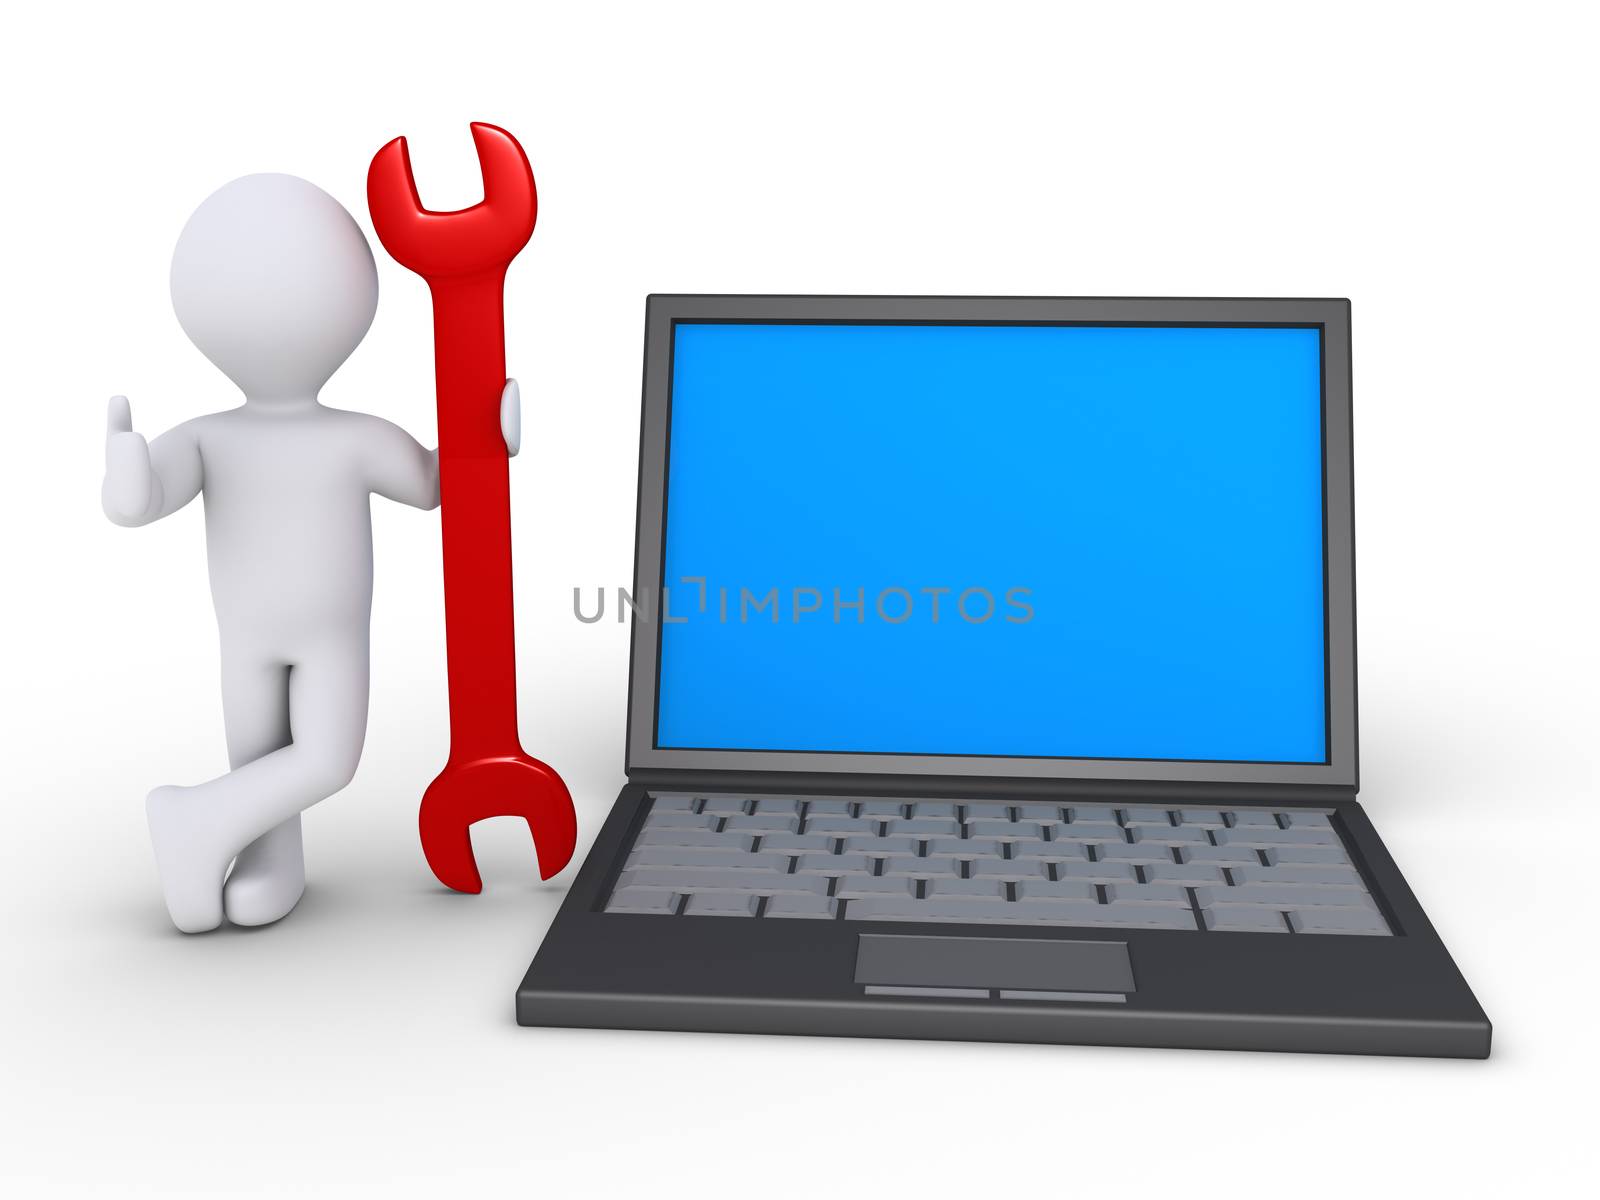 3d person with a wrench is standing beside an opened laptop